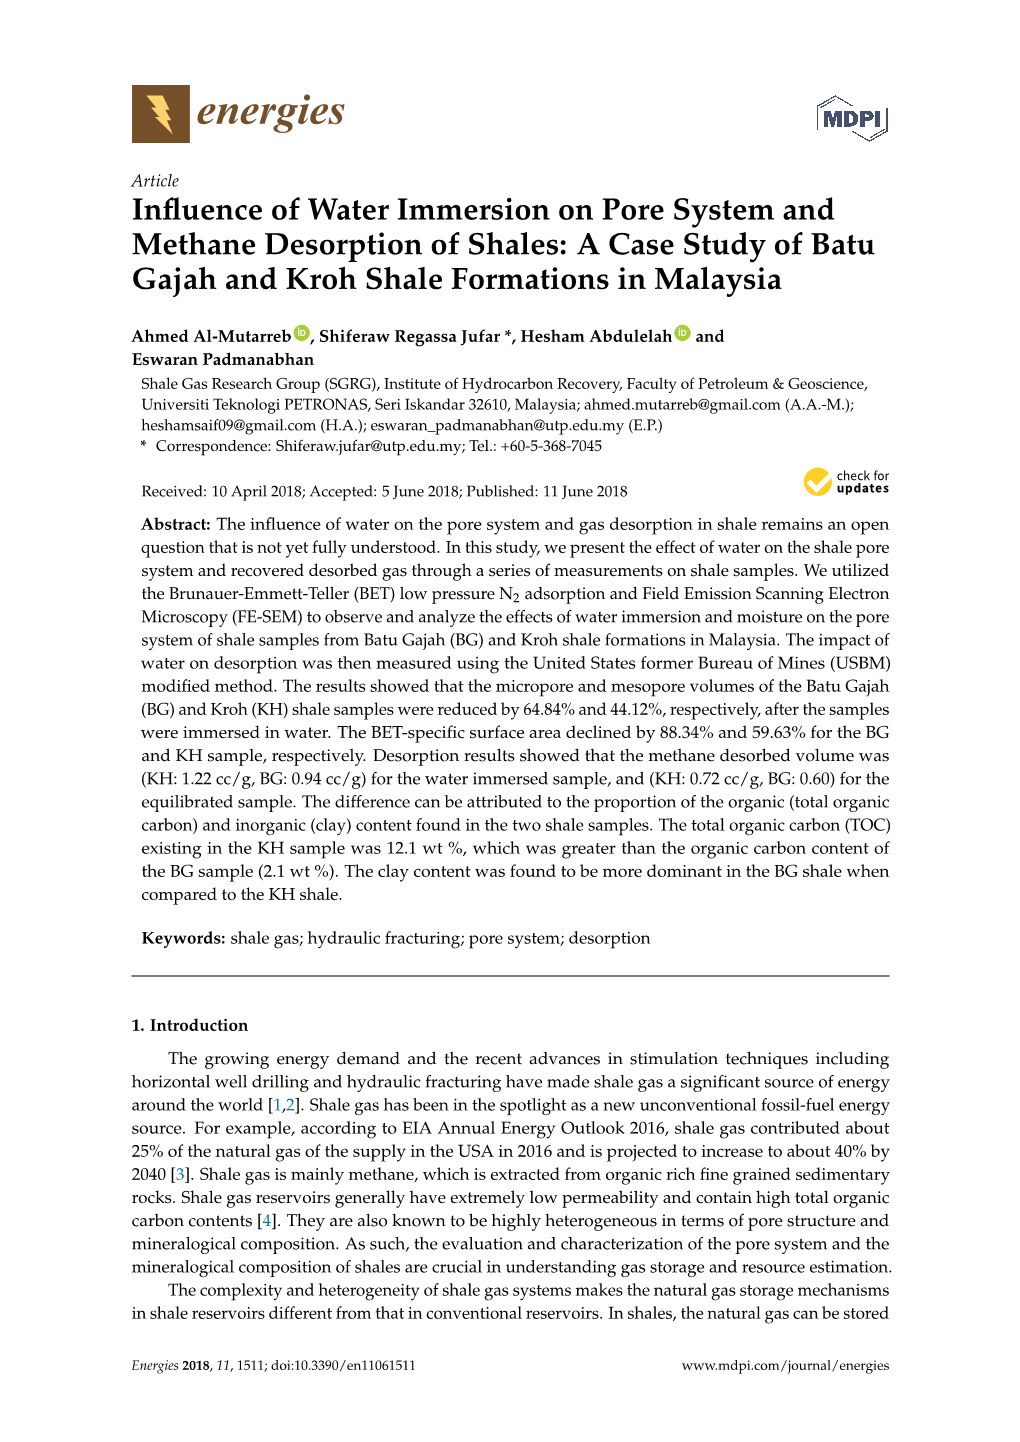 A Case Study of Batu Gajah and Kroh Shale Formations in Malaysia